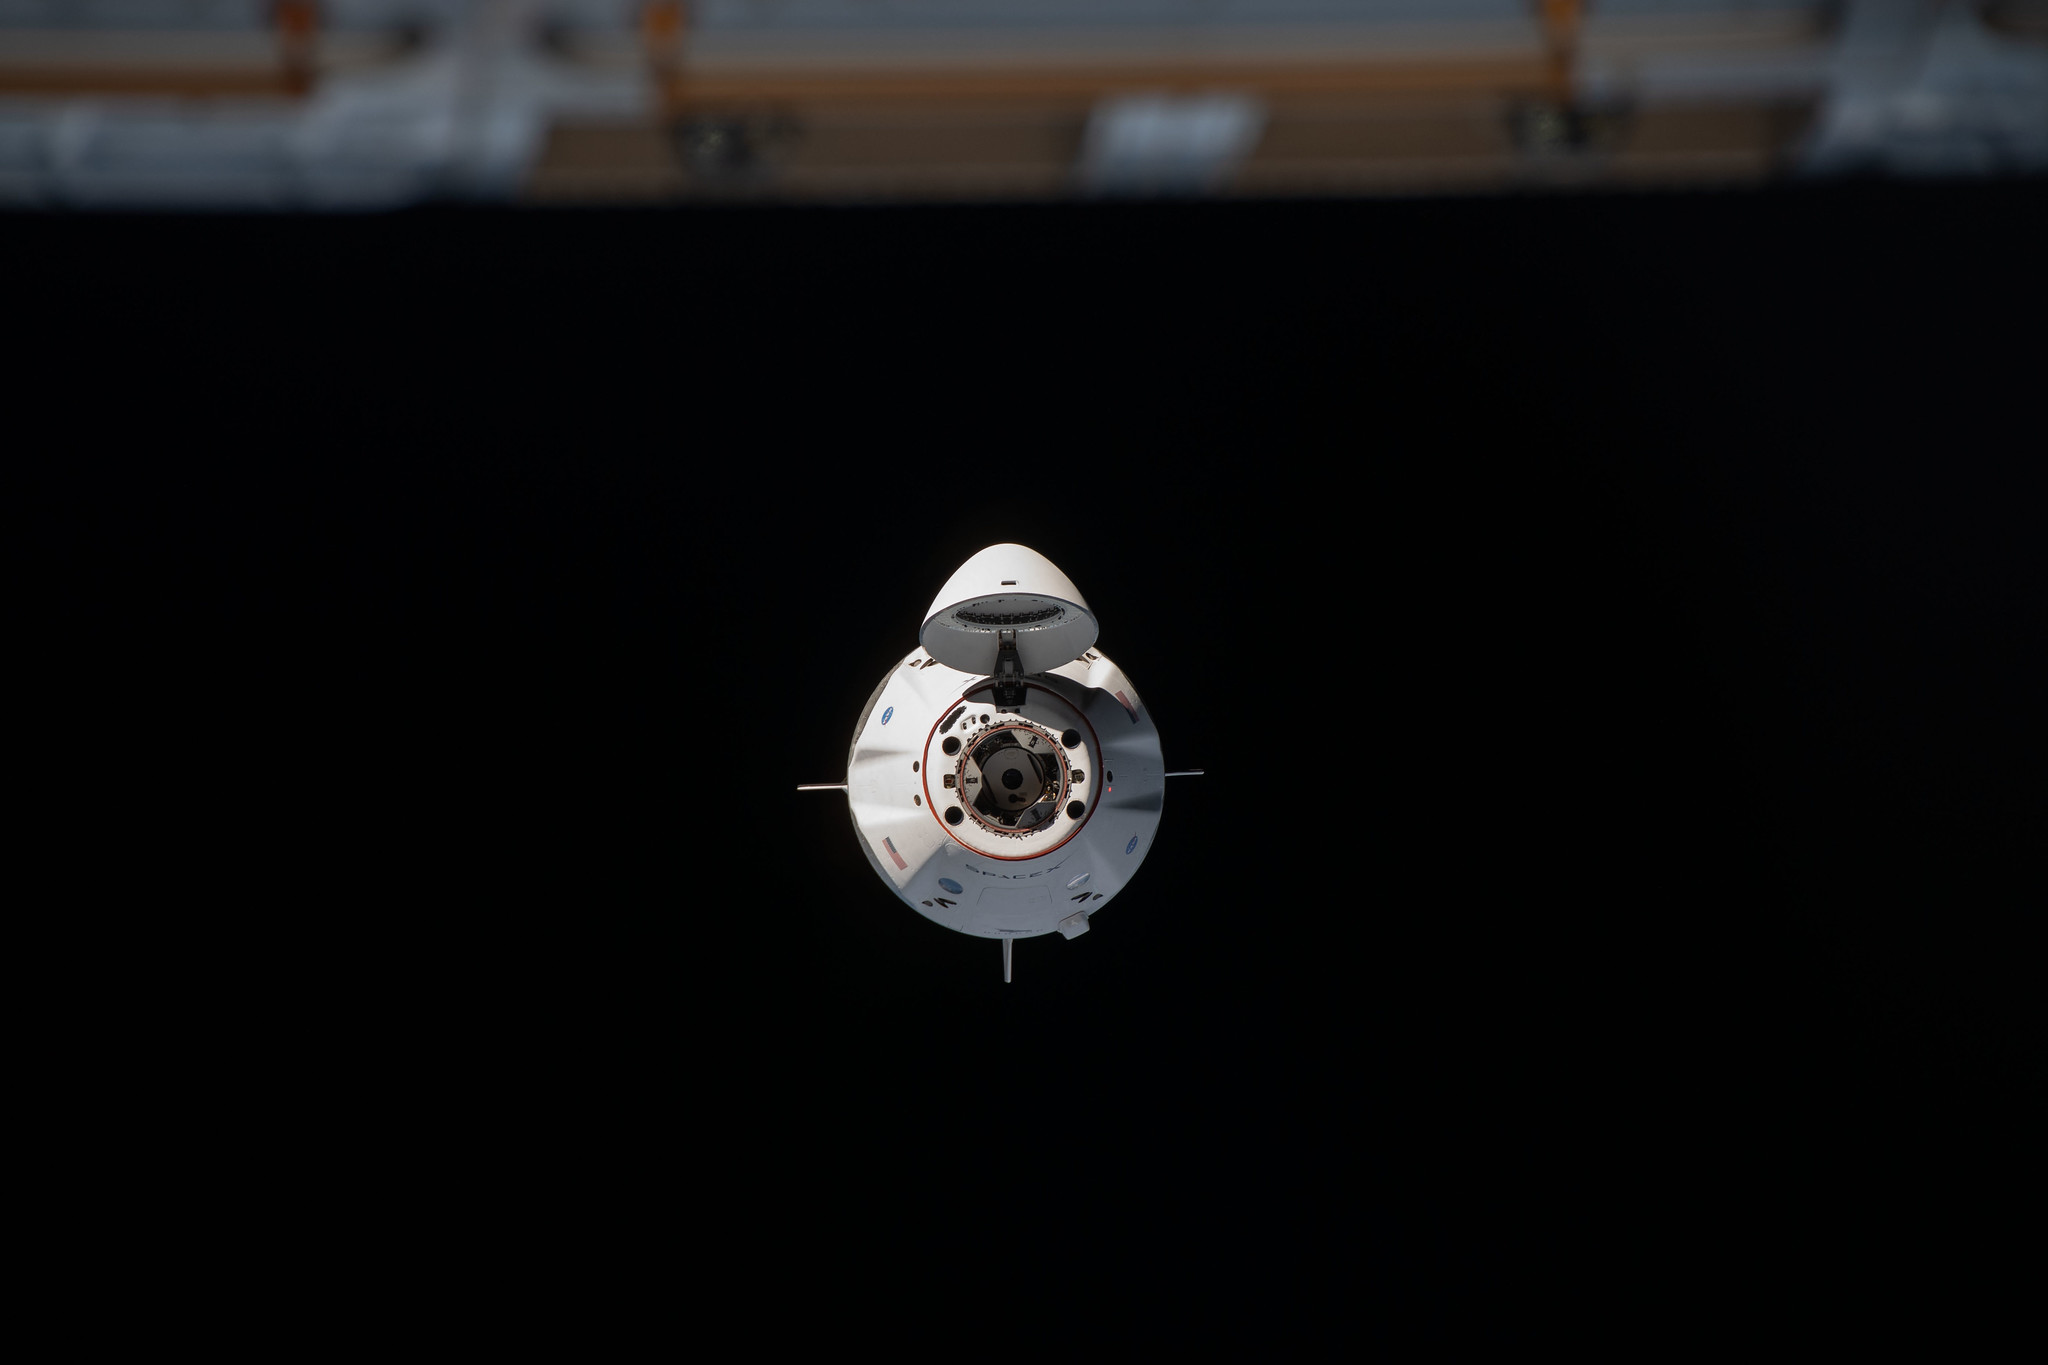 The SpaceX Crew Dragon spacecraft is pictured approaching the International Space Station for a docking